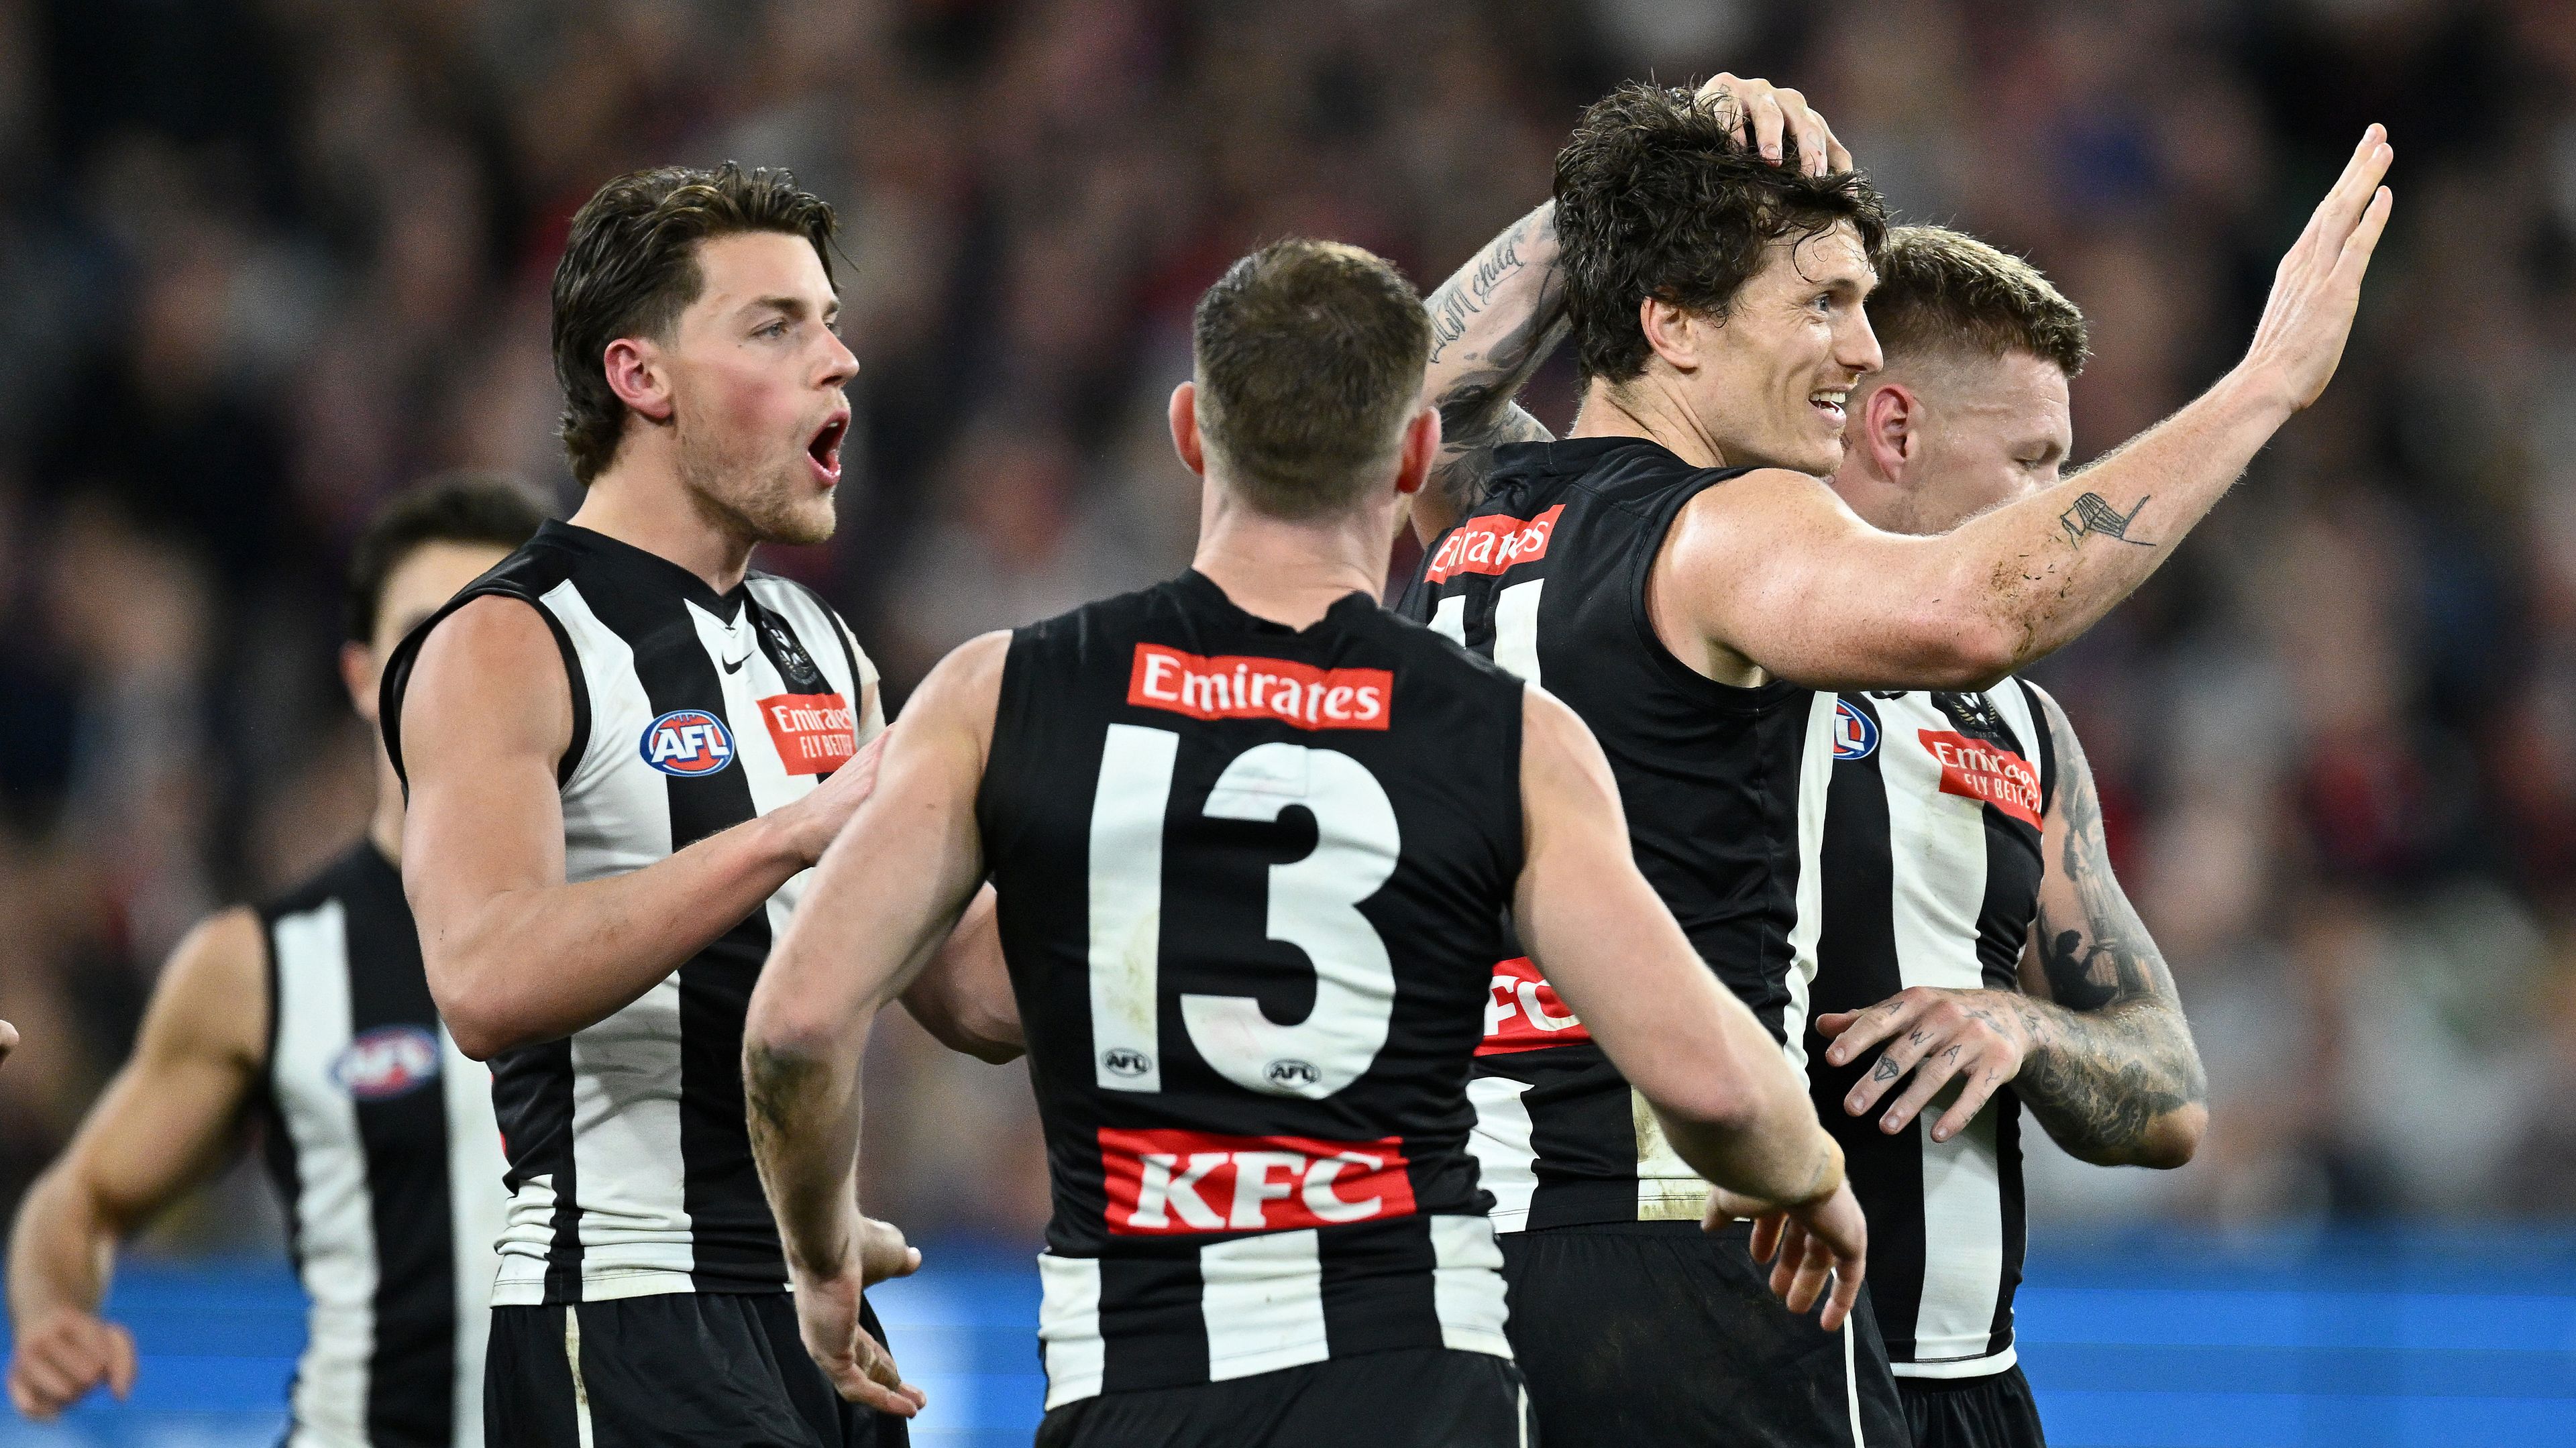 MELBOURNE, AUSTRALIA - SEPTEMBER 07: Brody Mihocek of the Magpies is congratulated by team mates after kicking a goal during the AFL First Qualifying Final match between Collingwood Magpies and Melbourne Demons at Melbourne Cricket Ground, on September 07, 2023, in Melbourne, Australia. (Photo by Quinn Rooney/Getty Images)